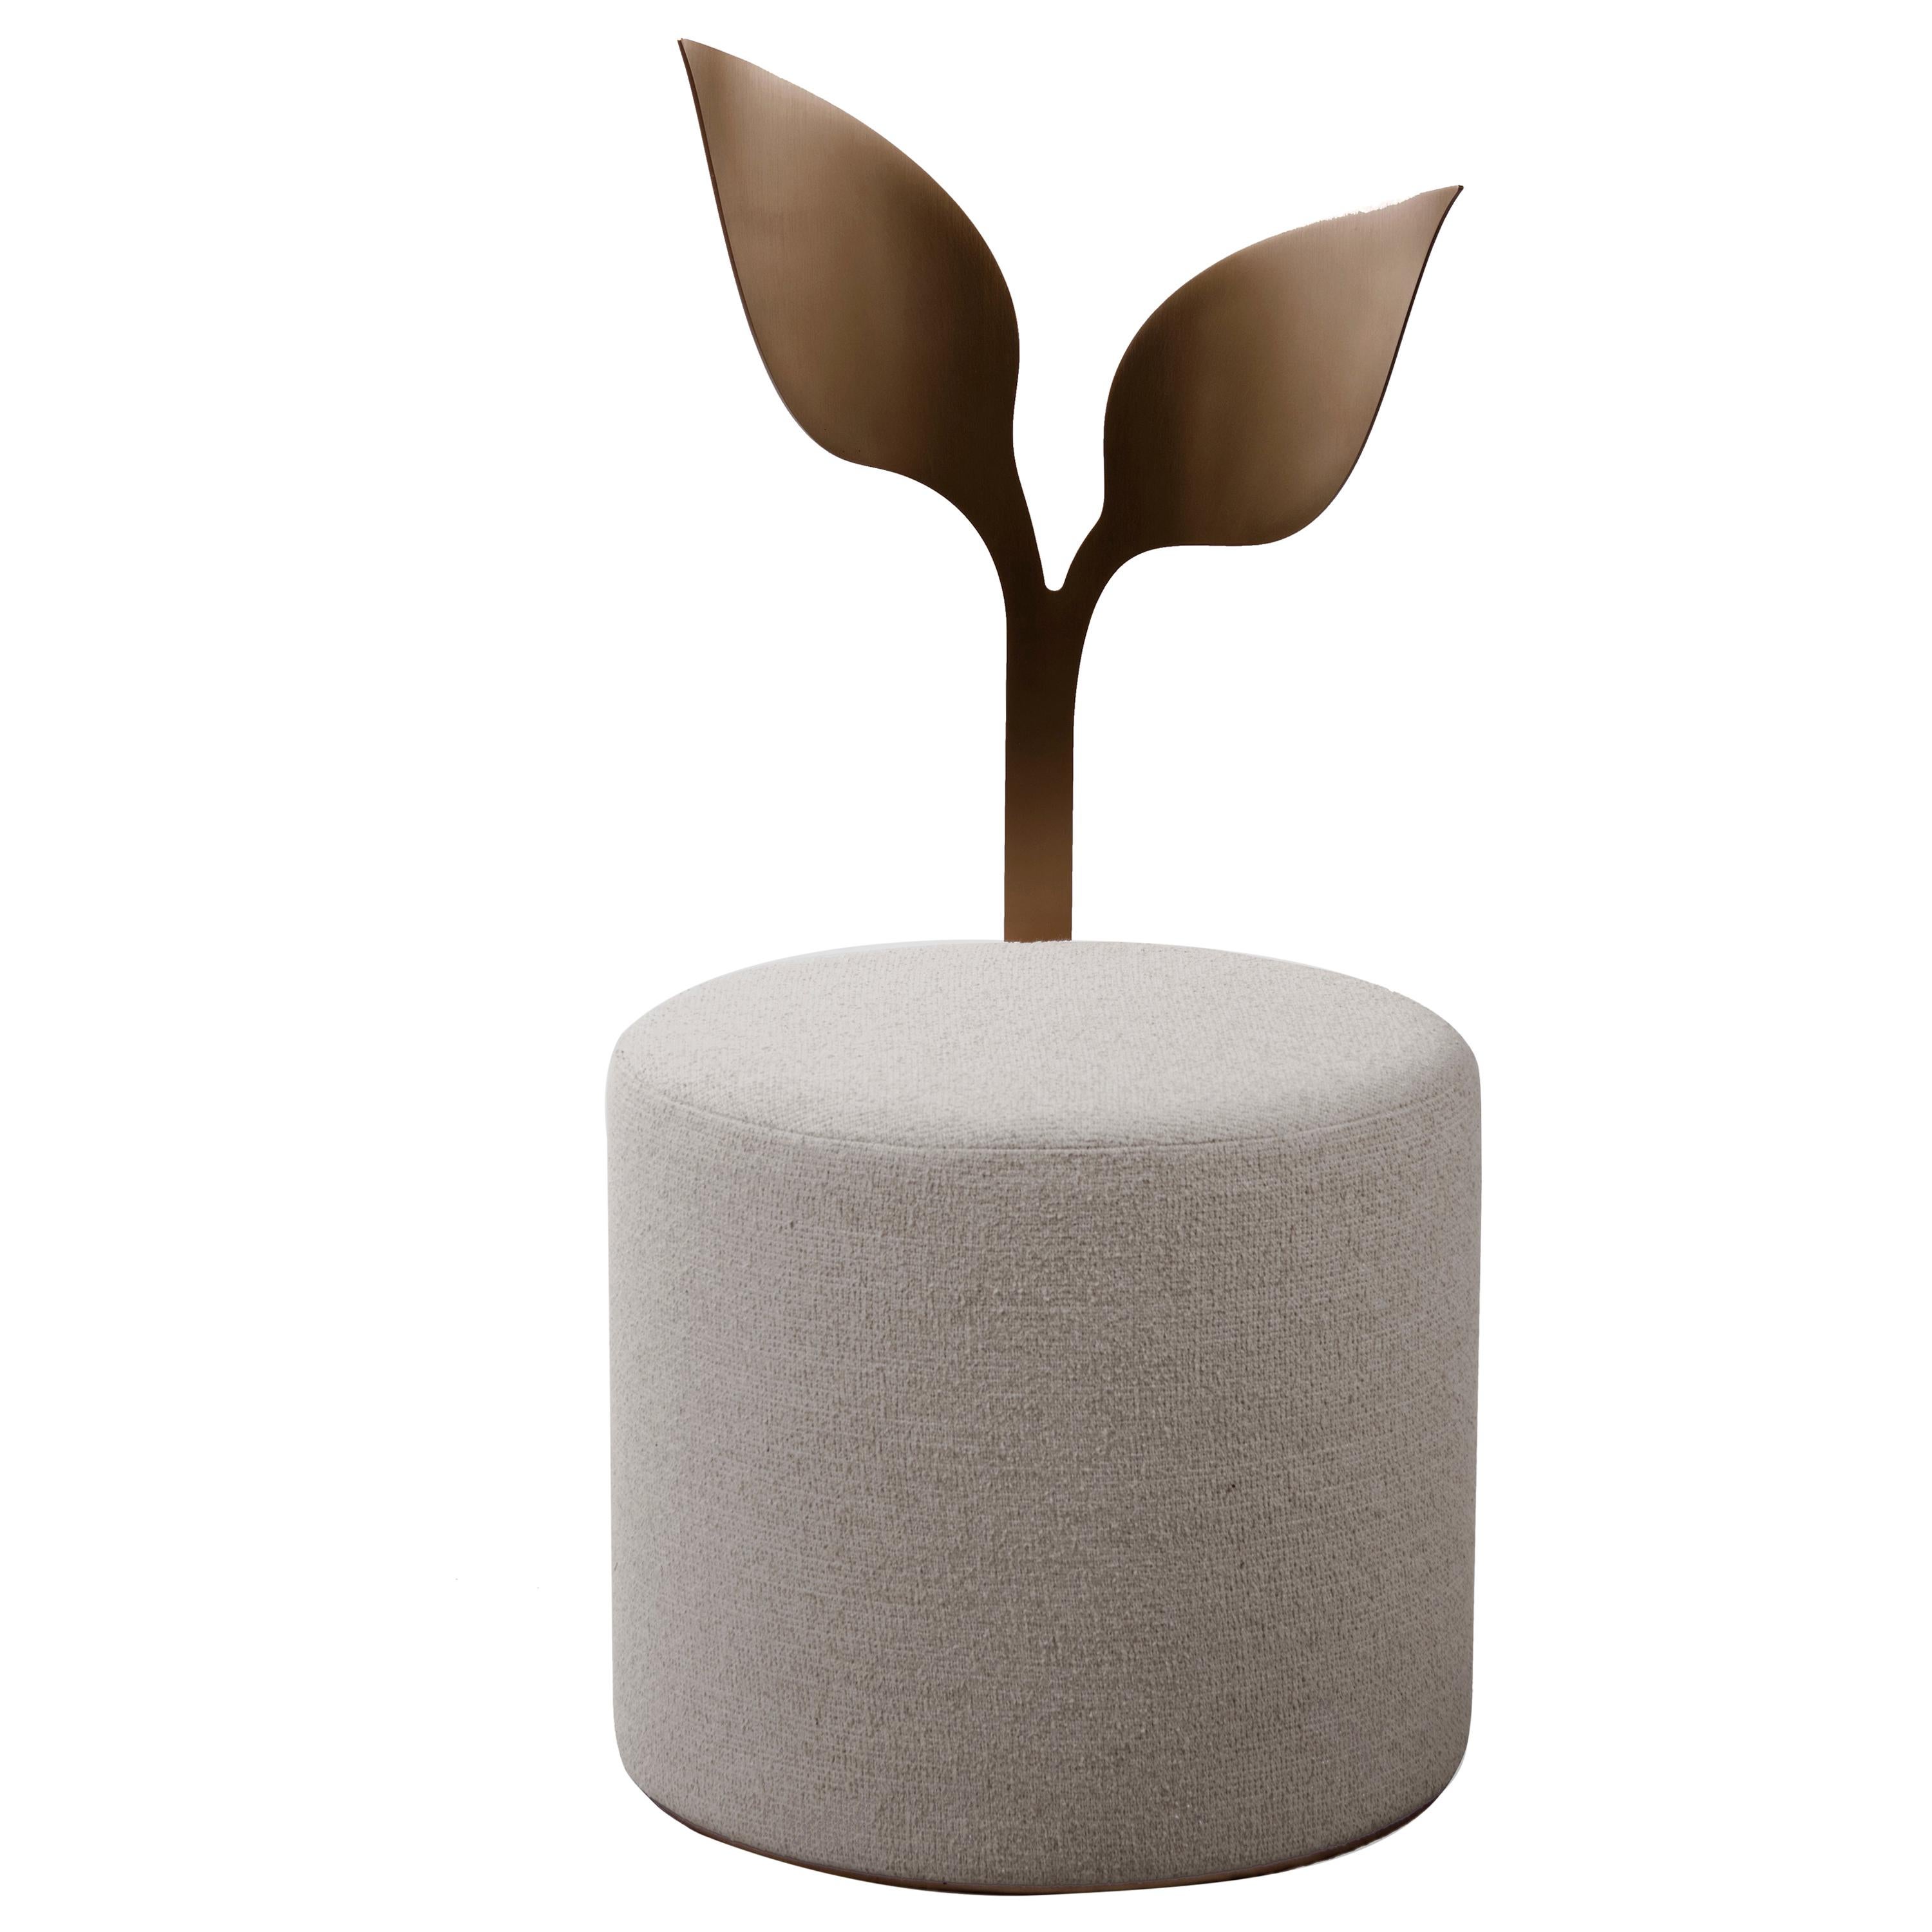 IVY Contemporary Pouf in Metal and Fabric